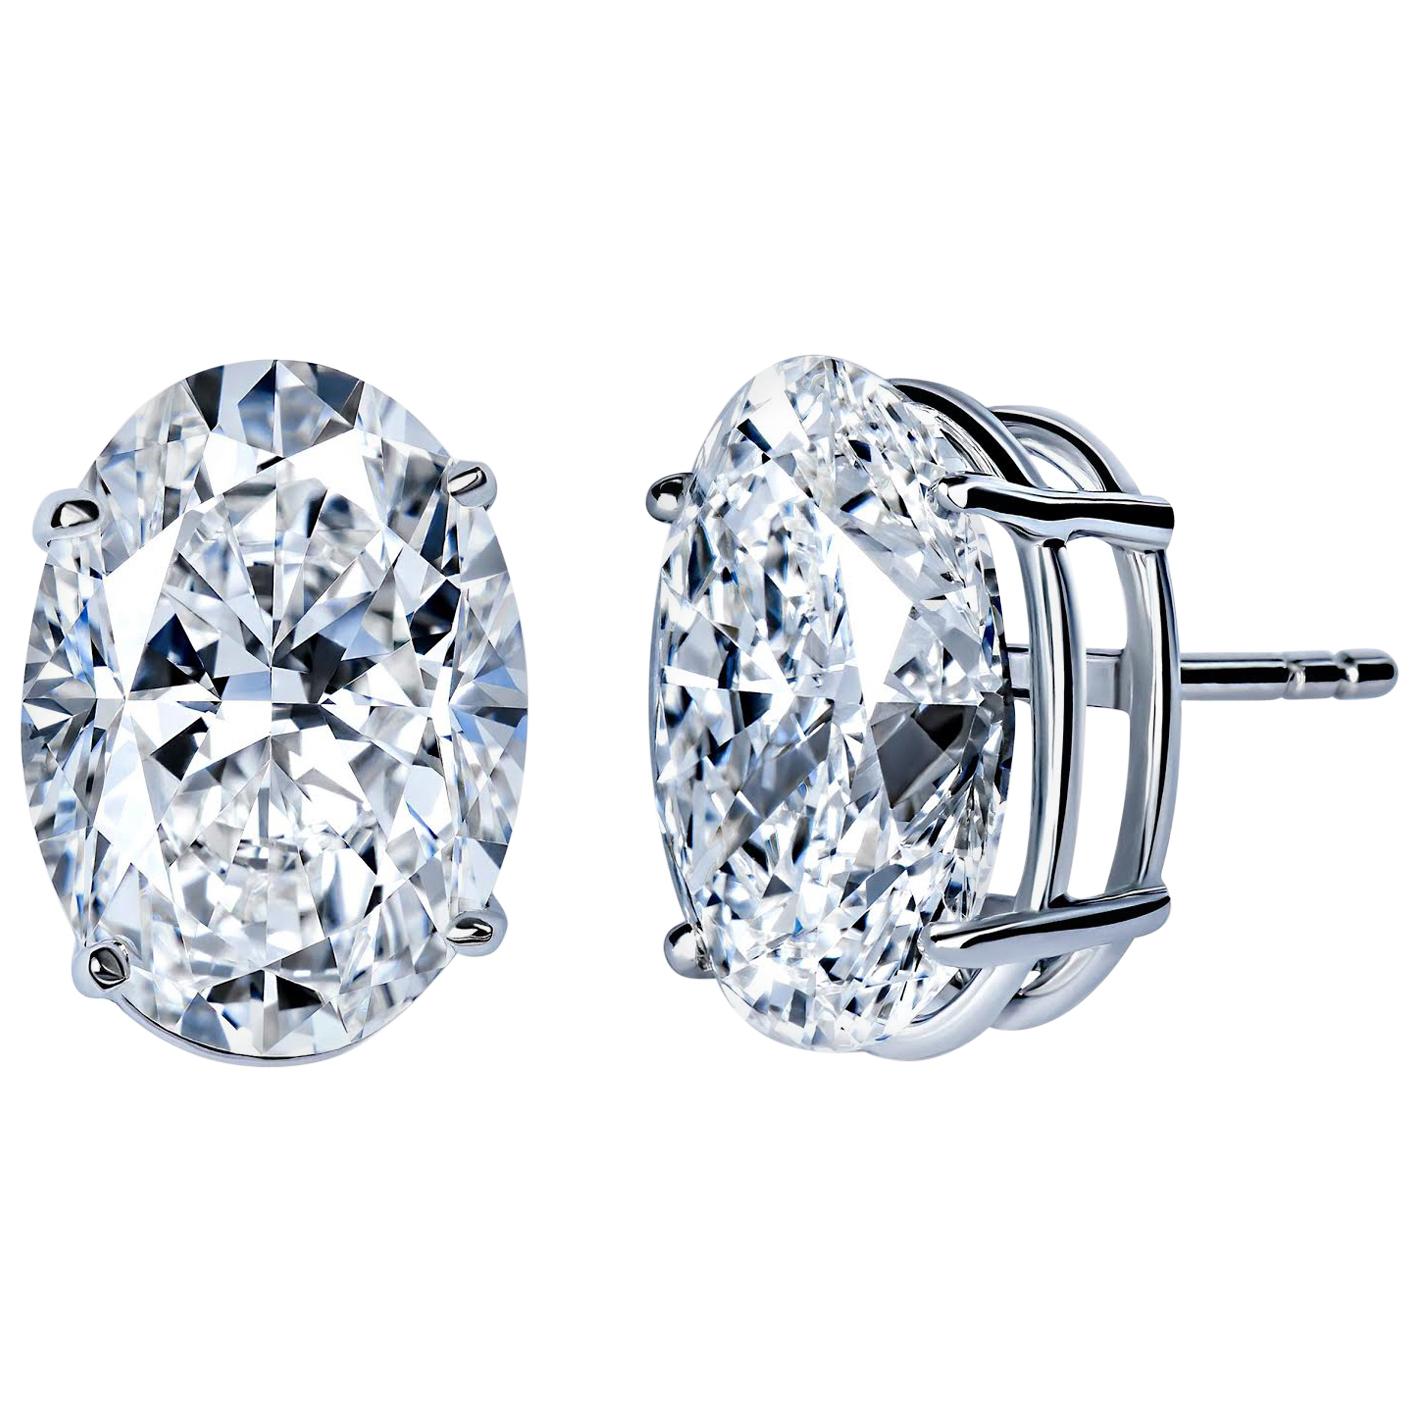 Sophisticated elegance with an edge.
Rare pair of oval shaped diamond stud earrings.
These extraordinary gems weight in at over 5 carats each! for a total combined  carat weight of 10.48 
Oval cut diamonds of this quality are rare, a perfectly